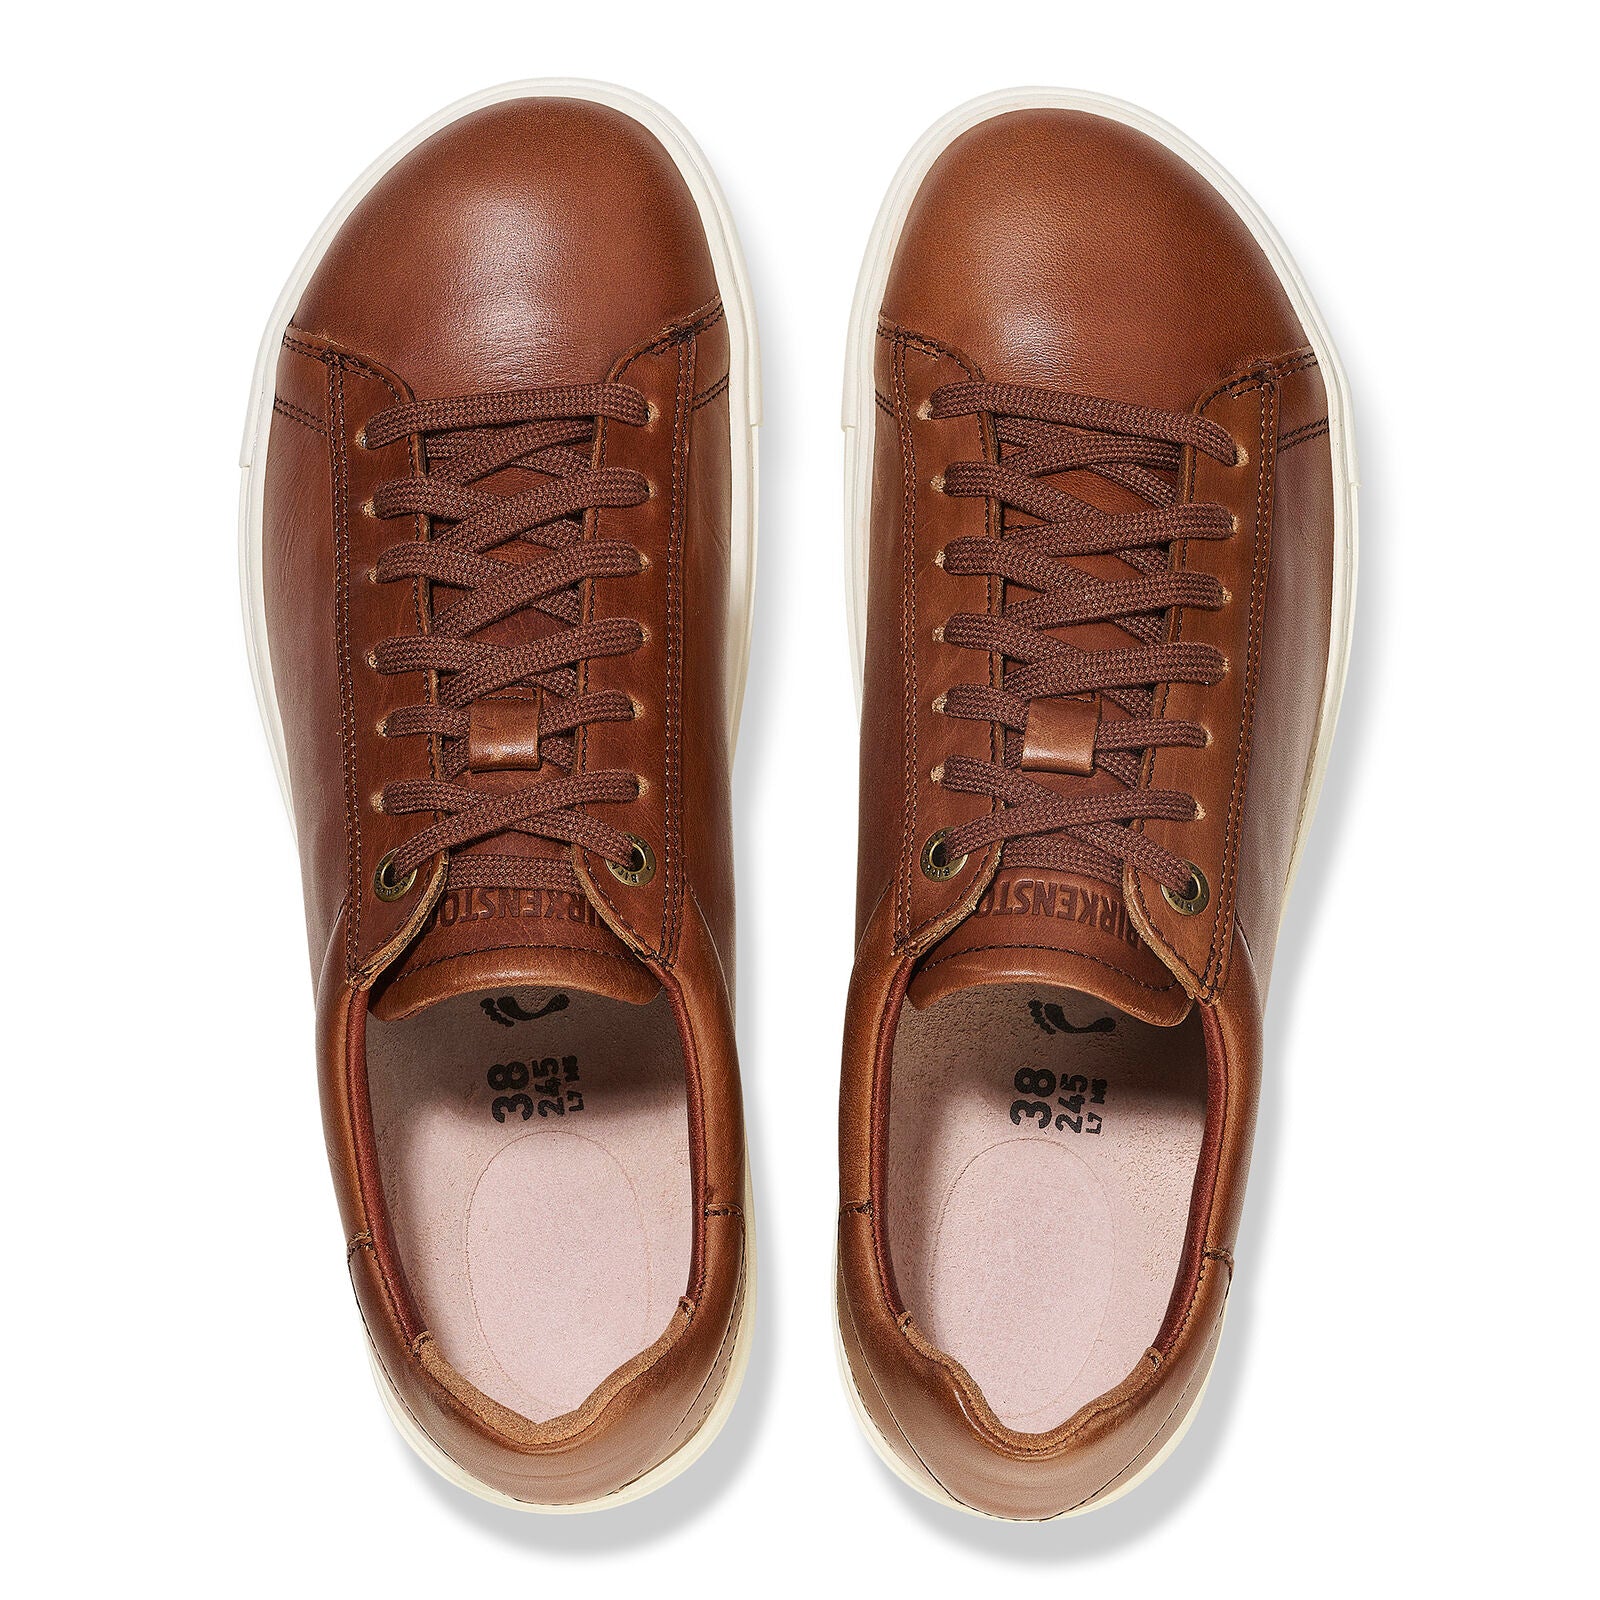 Birkenstock Limited Edition Bend Low cognac leather